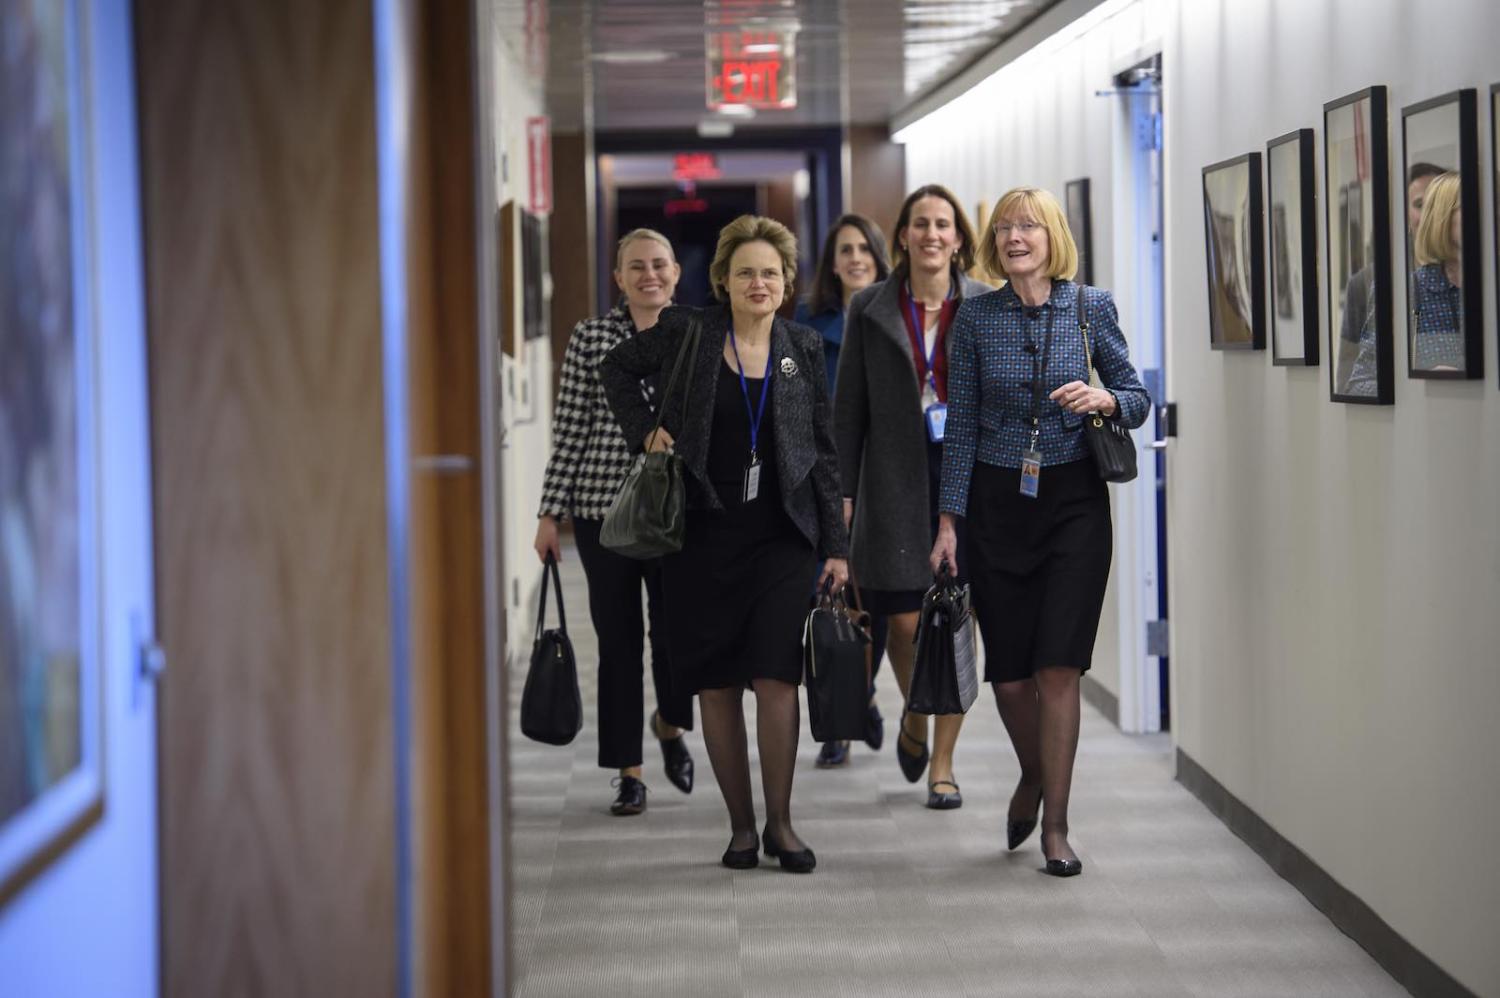 Frances Adamson (front left), Secretary of Australia's Department of Foreign Affairs and Trade, alongside Australia’s permanent representative to the UN Gillian Bird, at UN headquarters in March (Photo: Loey Felipe/United Nations)